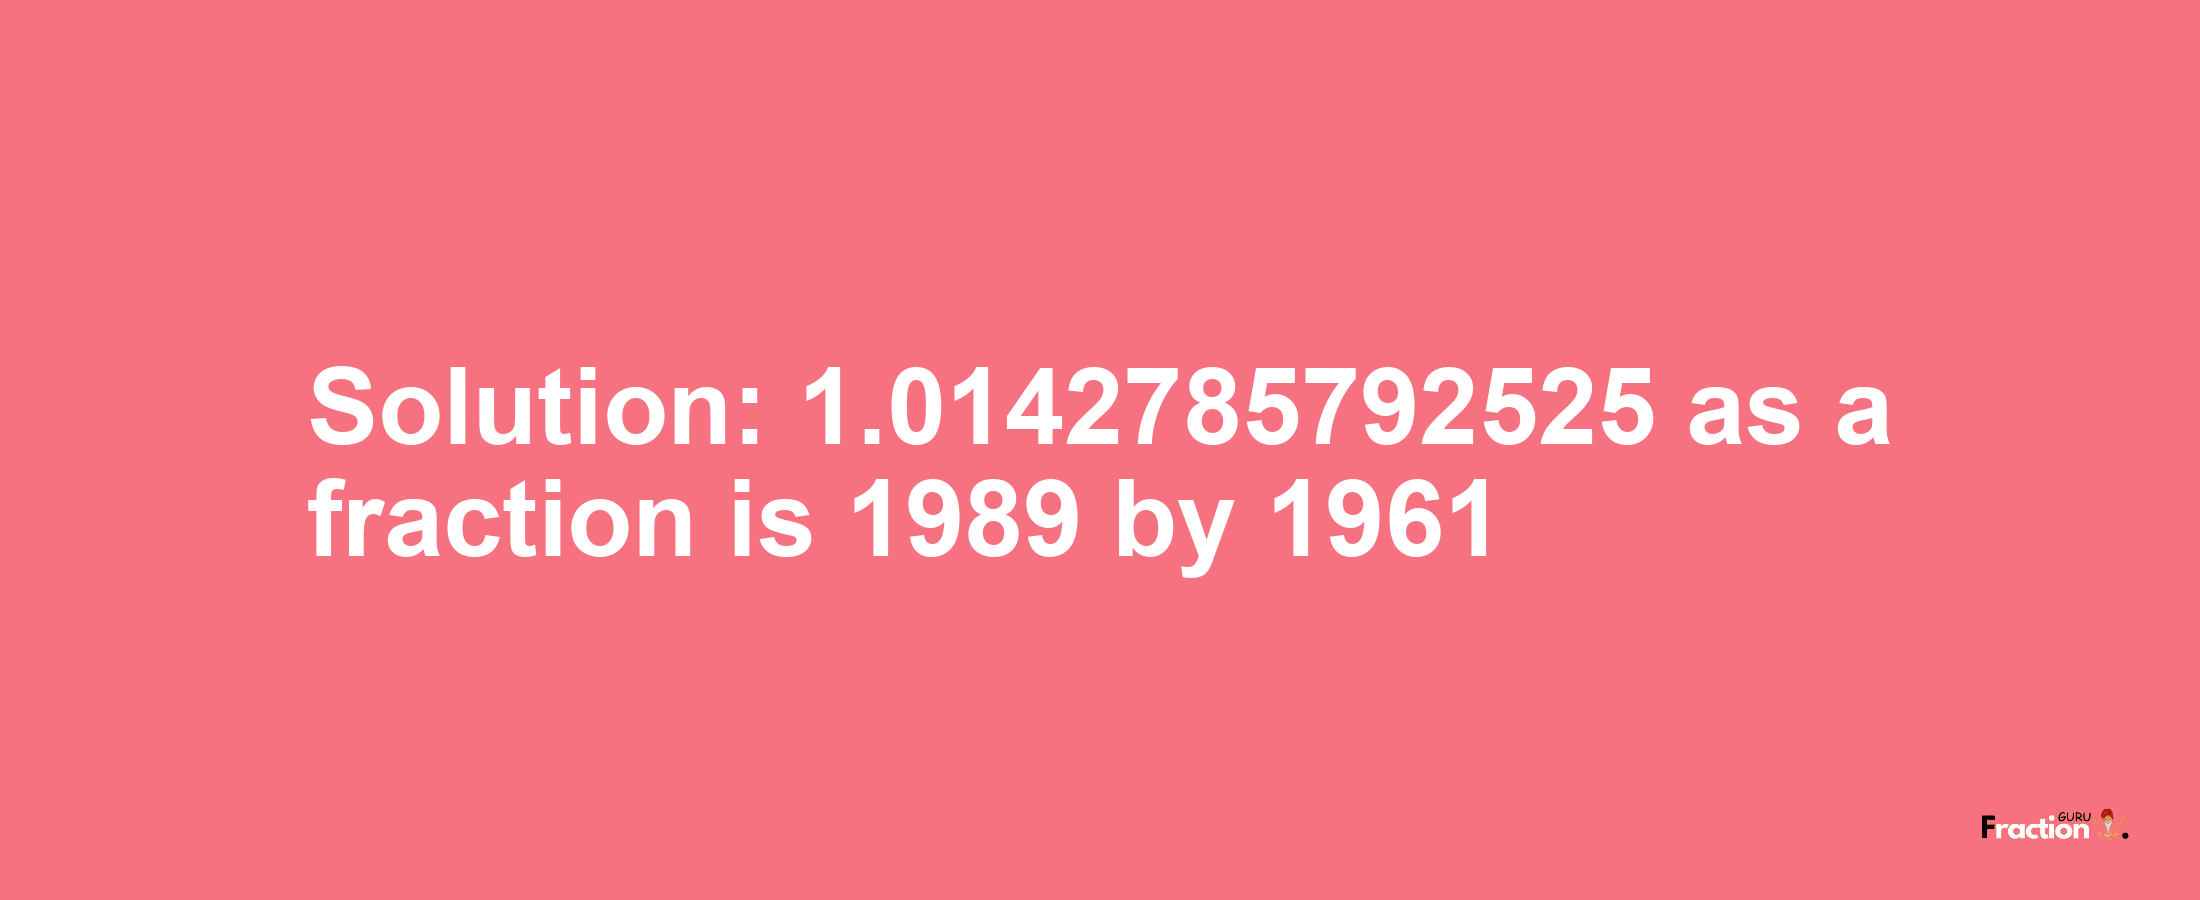 Solution:1.0142785792525 as a fraction is 1989/1961